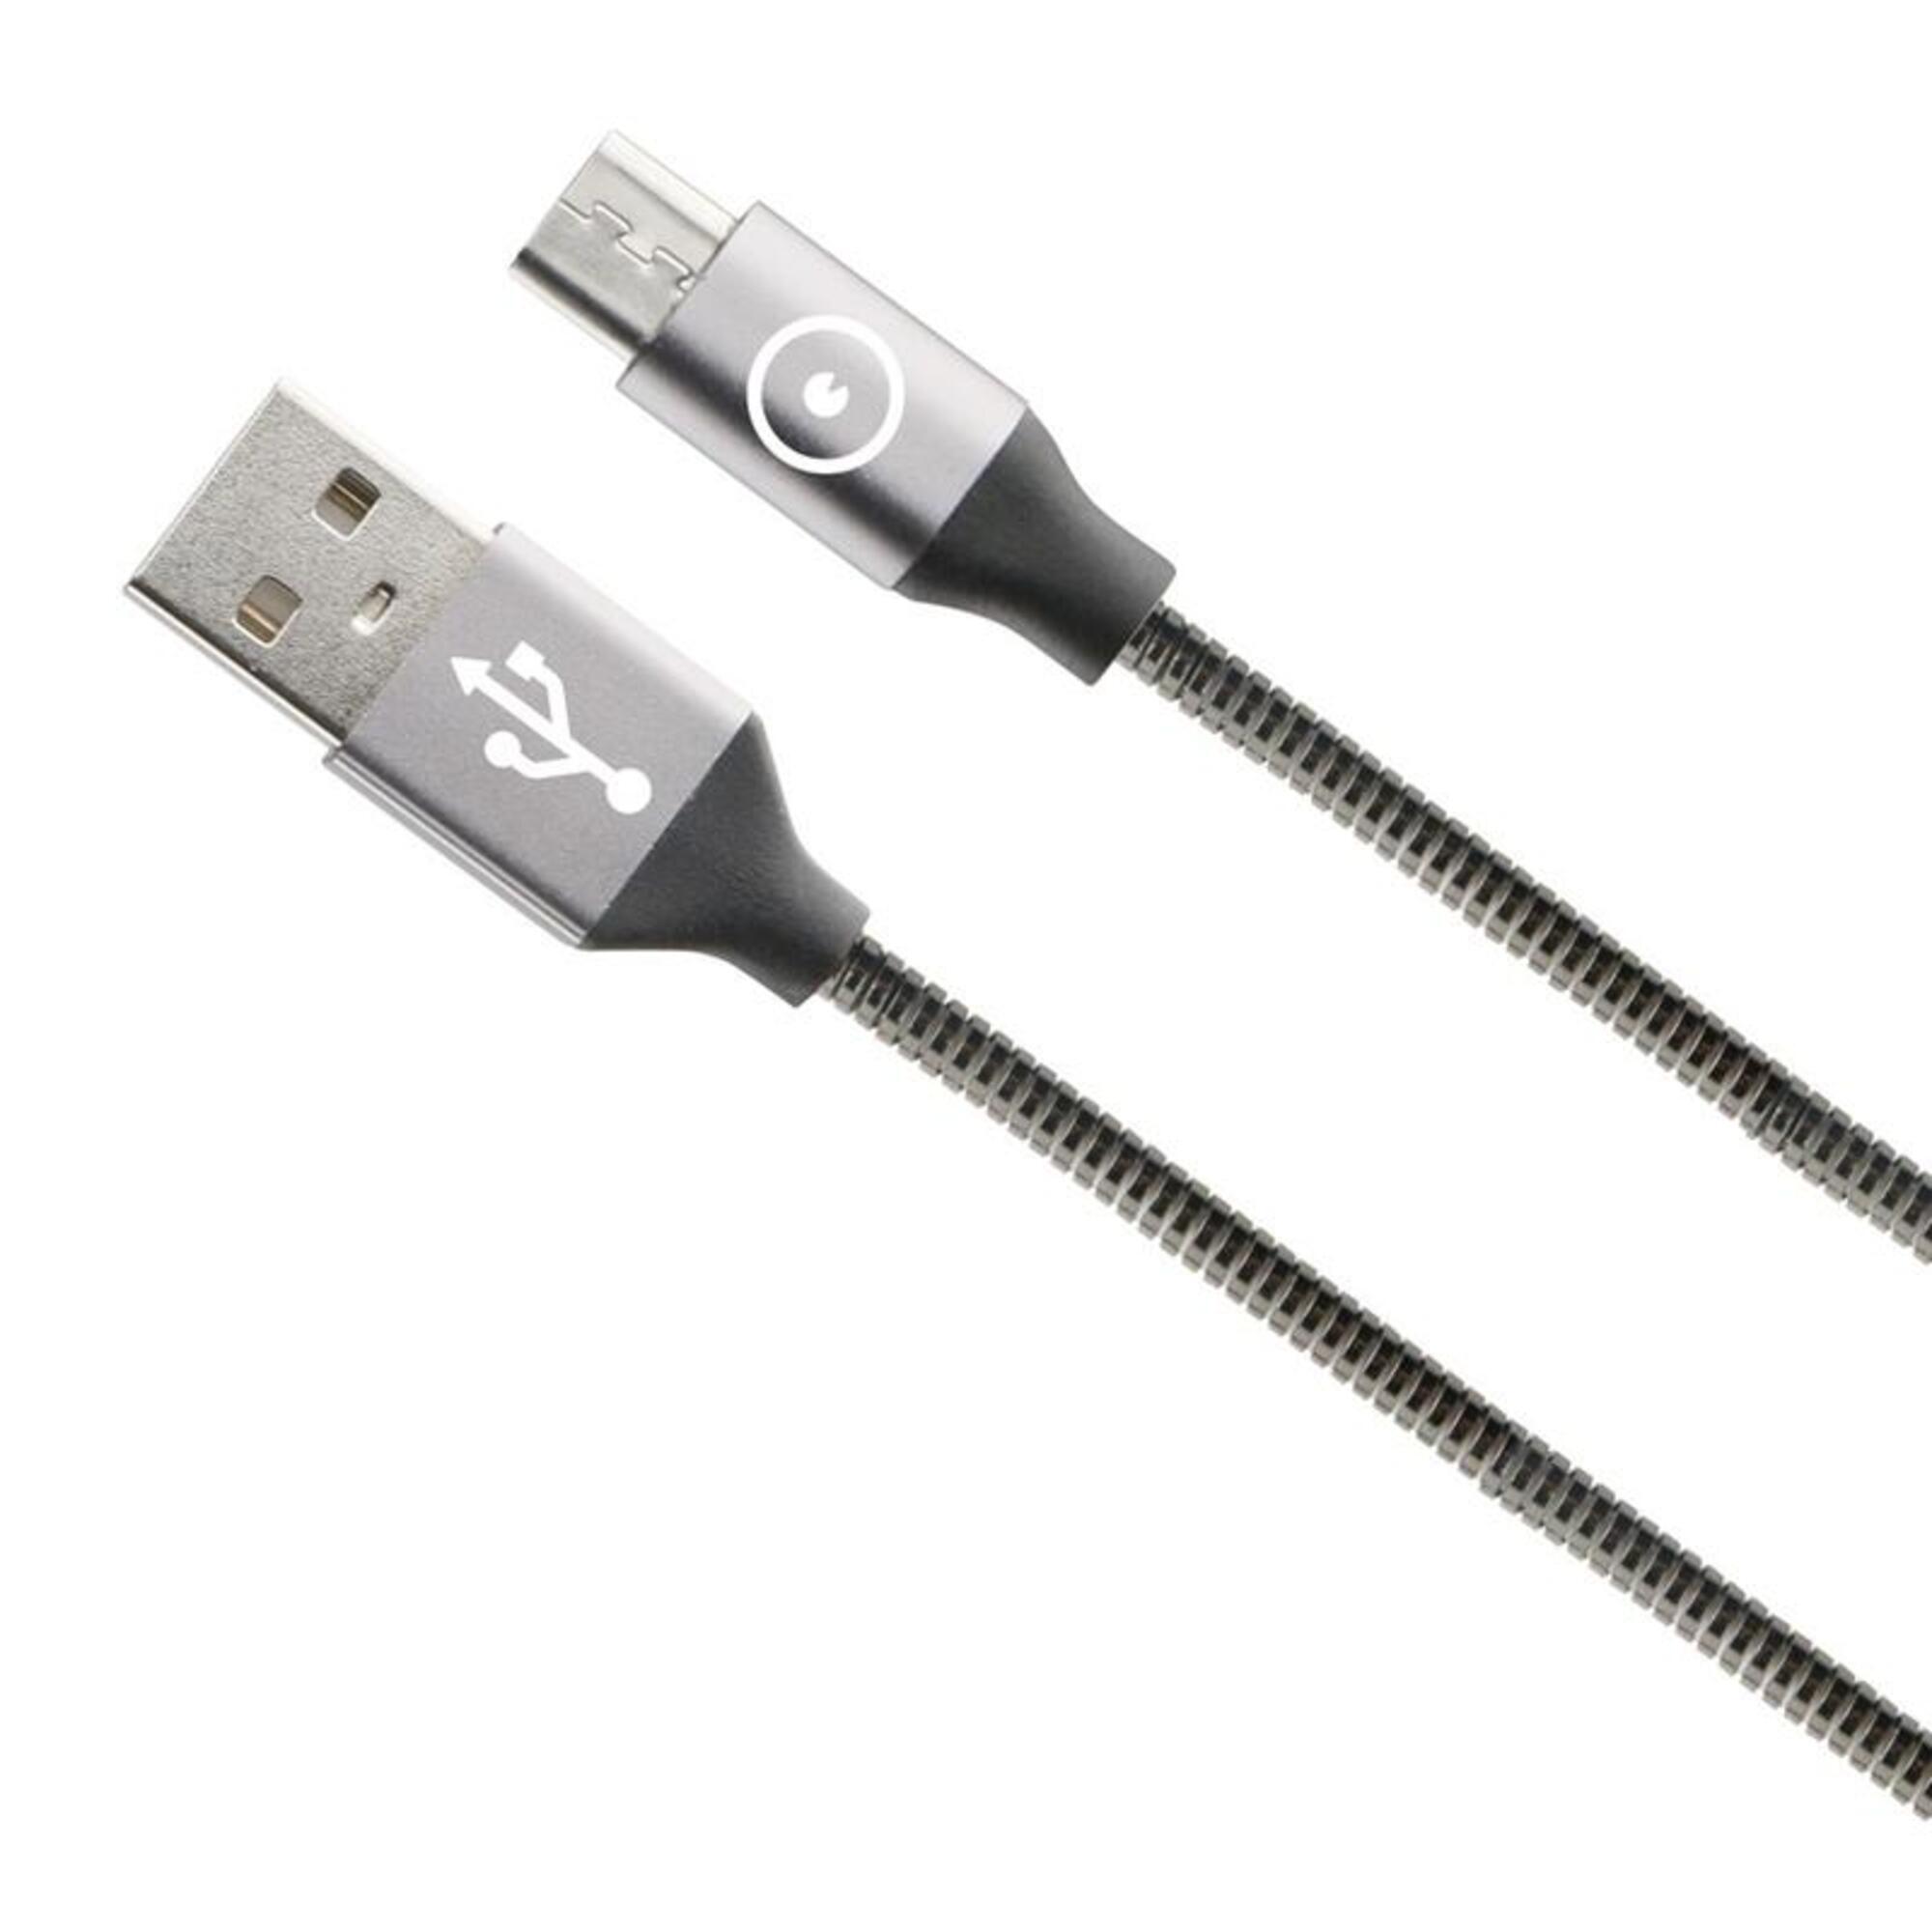 muvit Tiger cable USB a Micro USB metal flexible 2A 1.2m gris